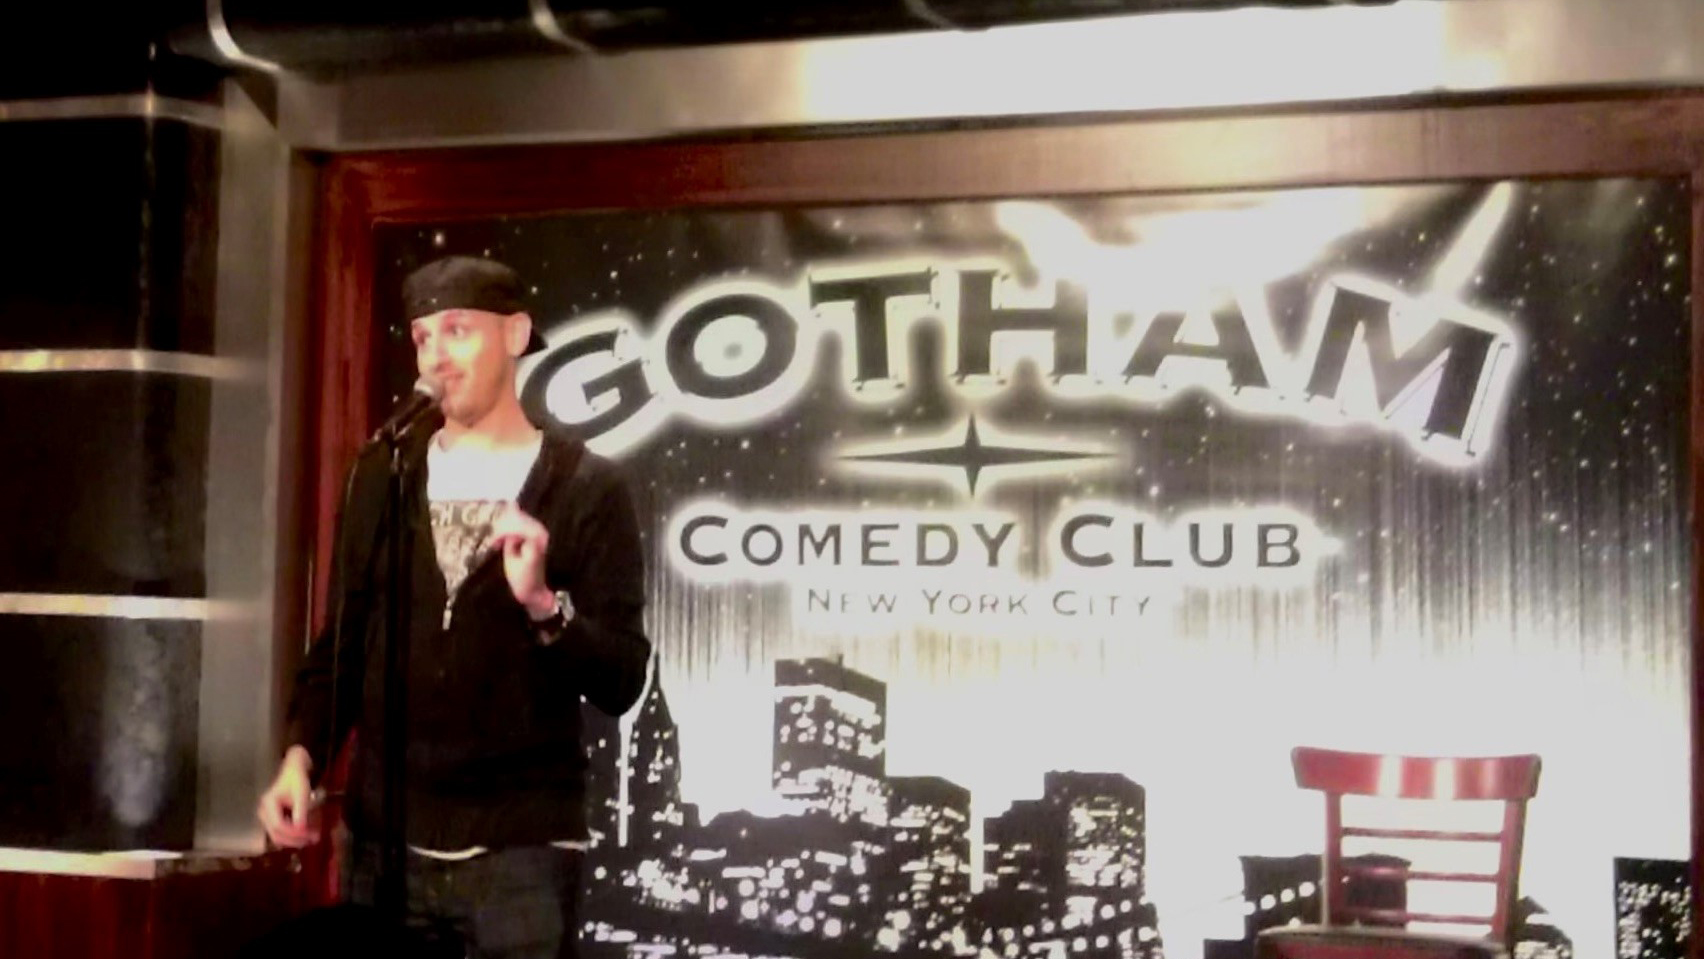 Dave performing stand up comedy at Gotham Comedy Club in New York City